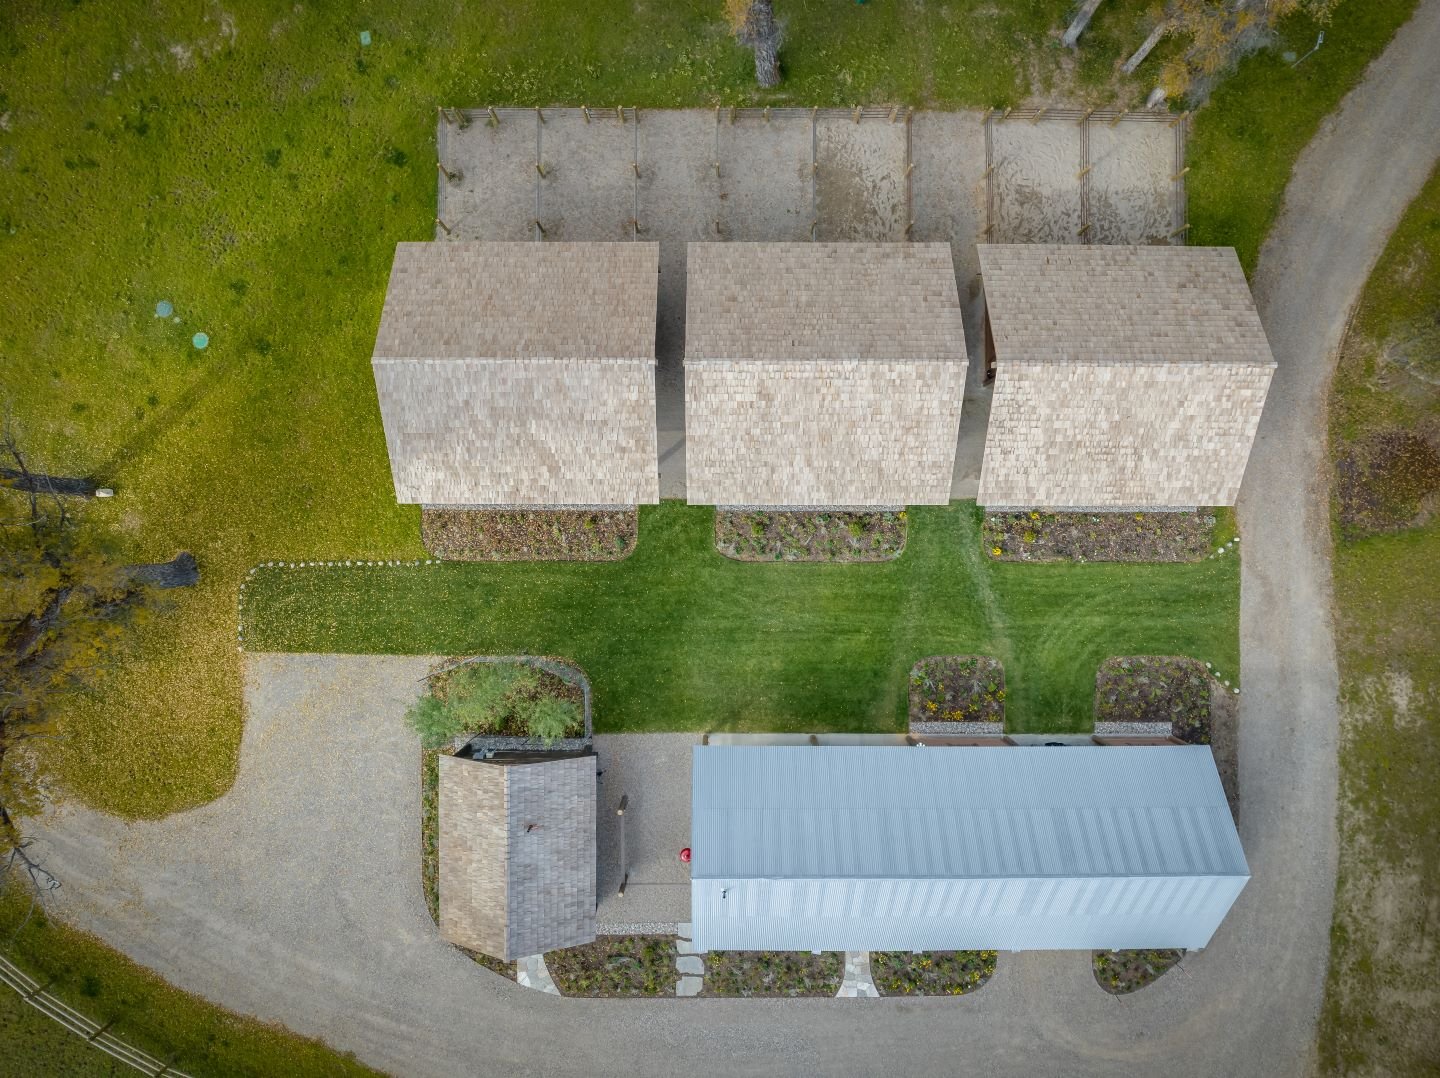 An aerial view showing the relocated pump house, rehabilitated machinery shed and three new stable structures, each with two horse stalls.